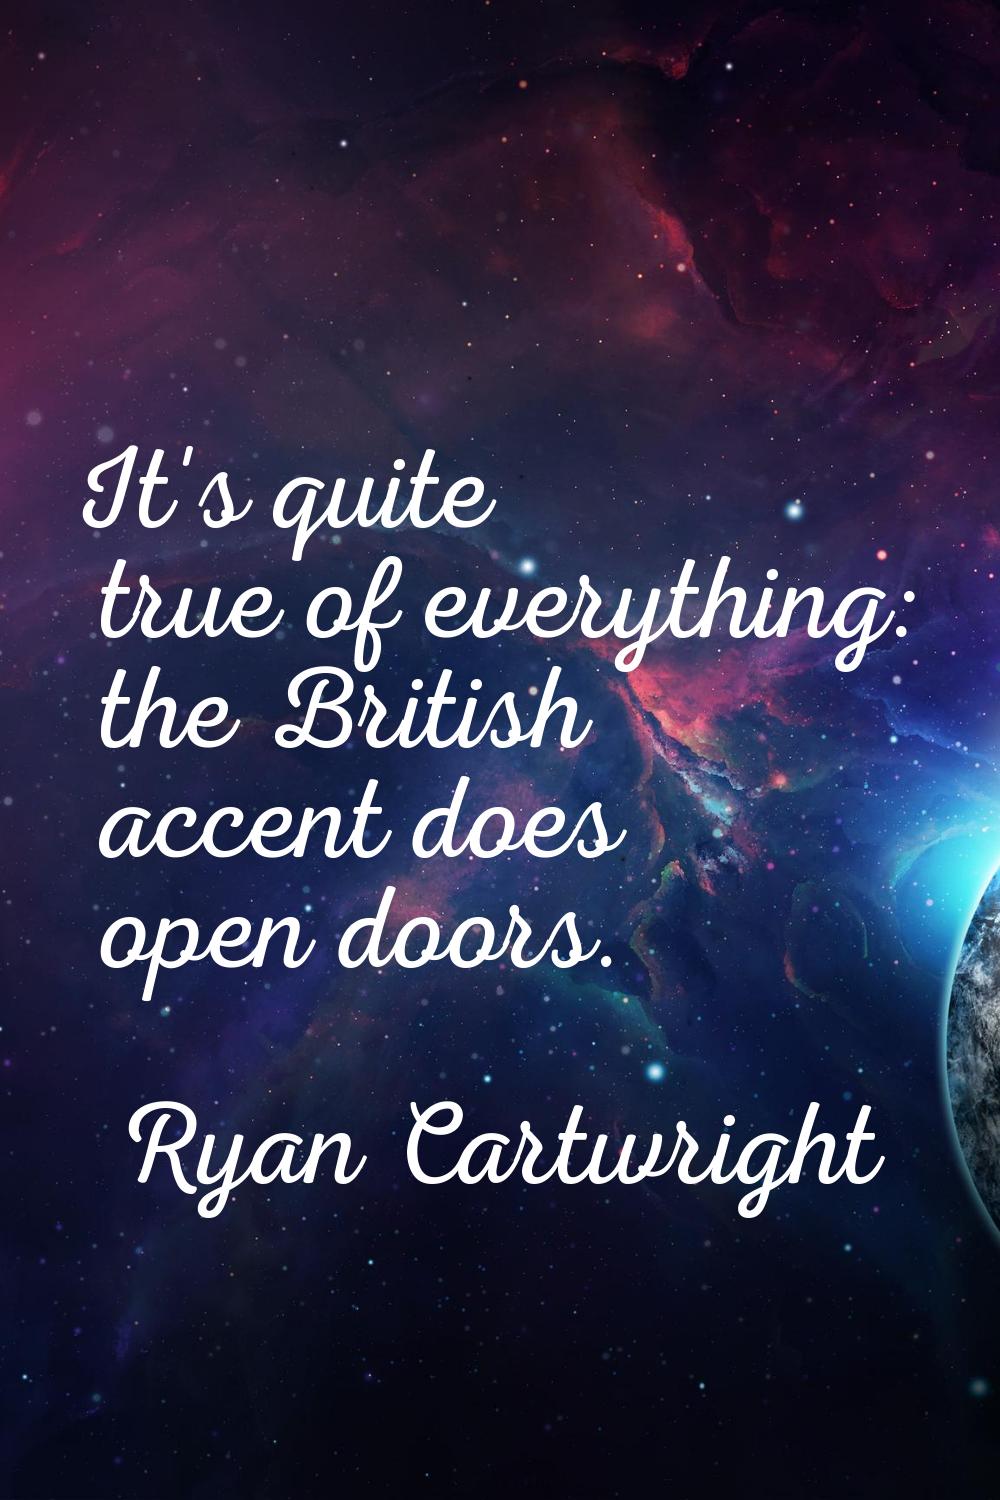 It's quite true of everything: the British accent does open doors.